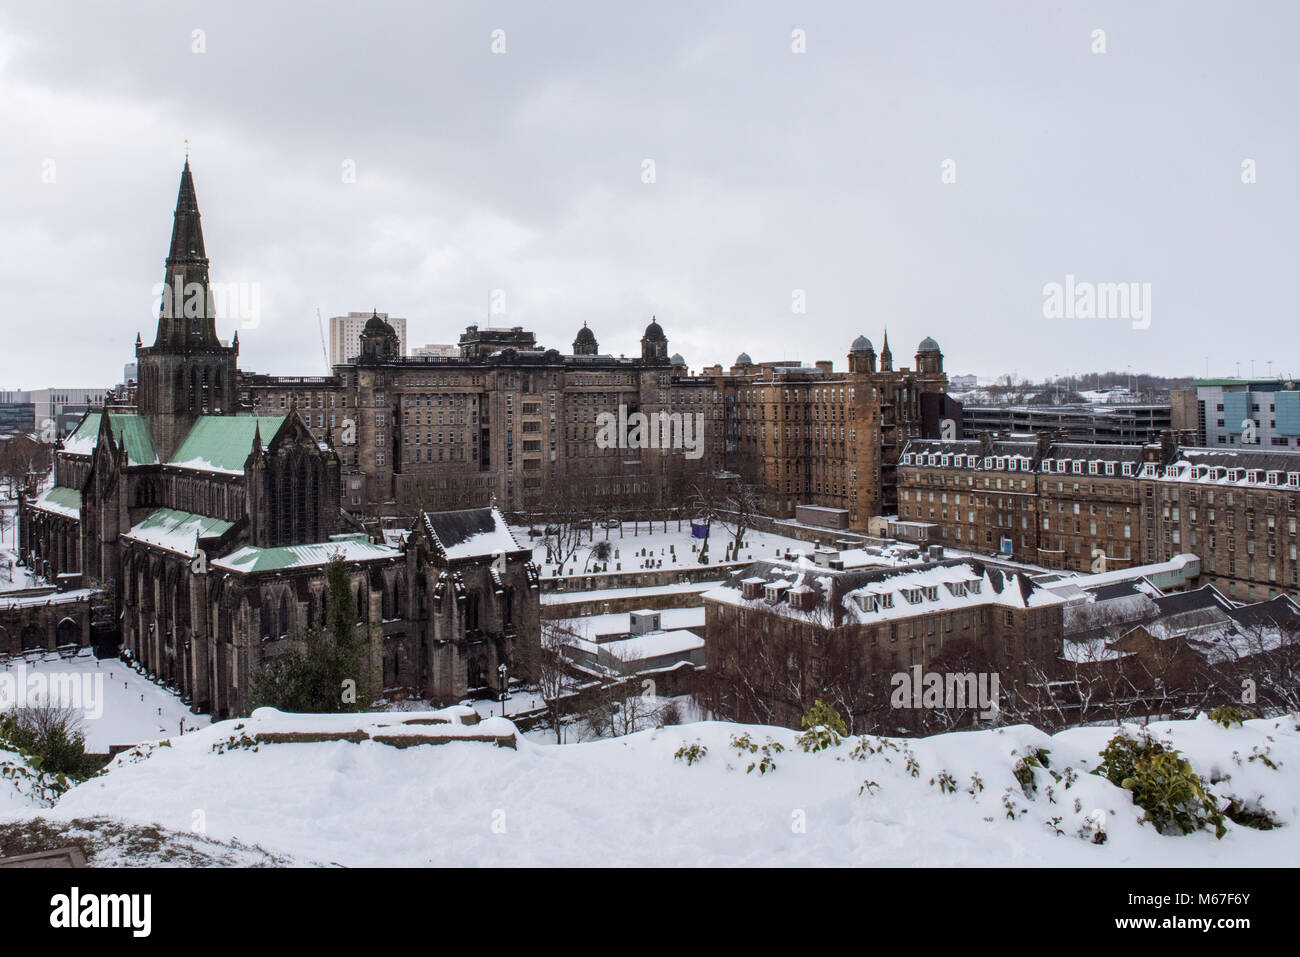 Glasgow, Scotland, UK. 1st March, 2018. View of Glasgow Cathedral and Royal Infirmary from the Necropolis graveyard in Glasgow, covered in snow as Beast from the East weather system hits Scotland Credit: Tony Clerkson/Alamy Live News Stock Photo